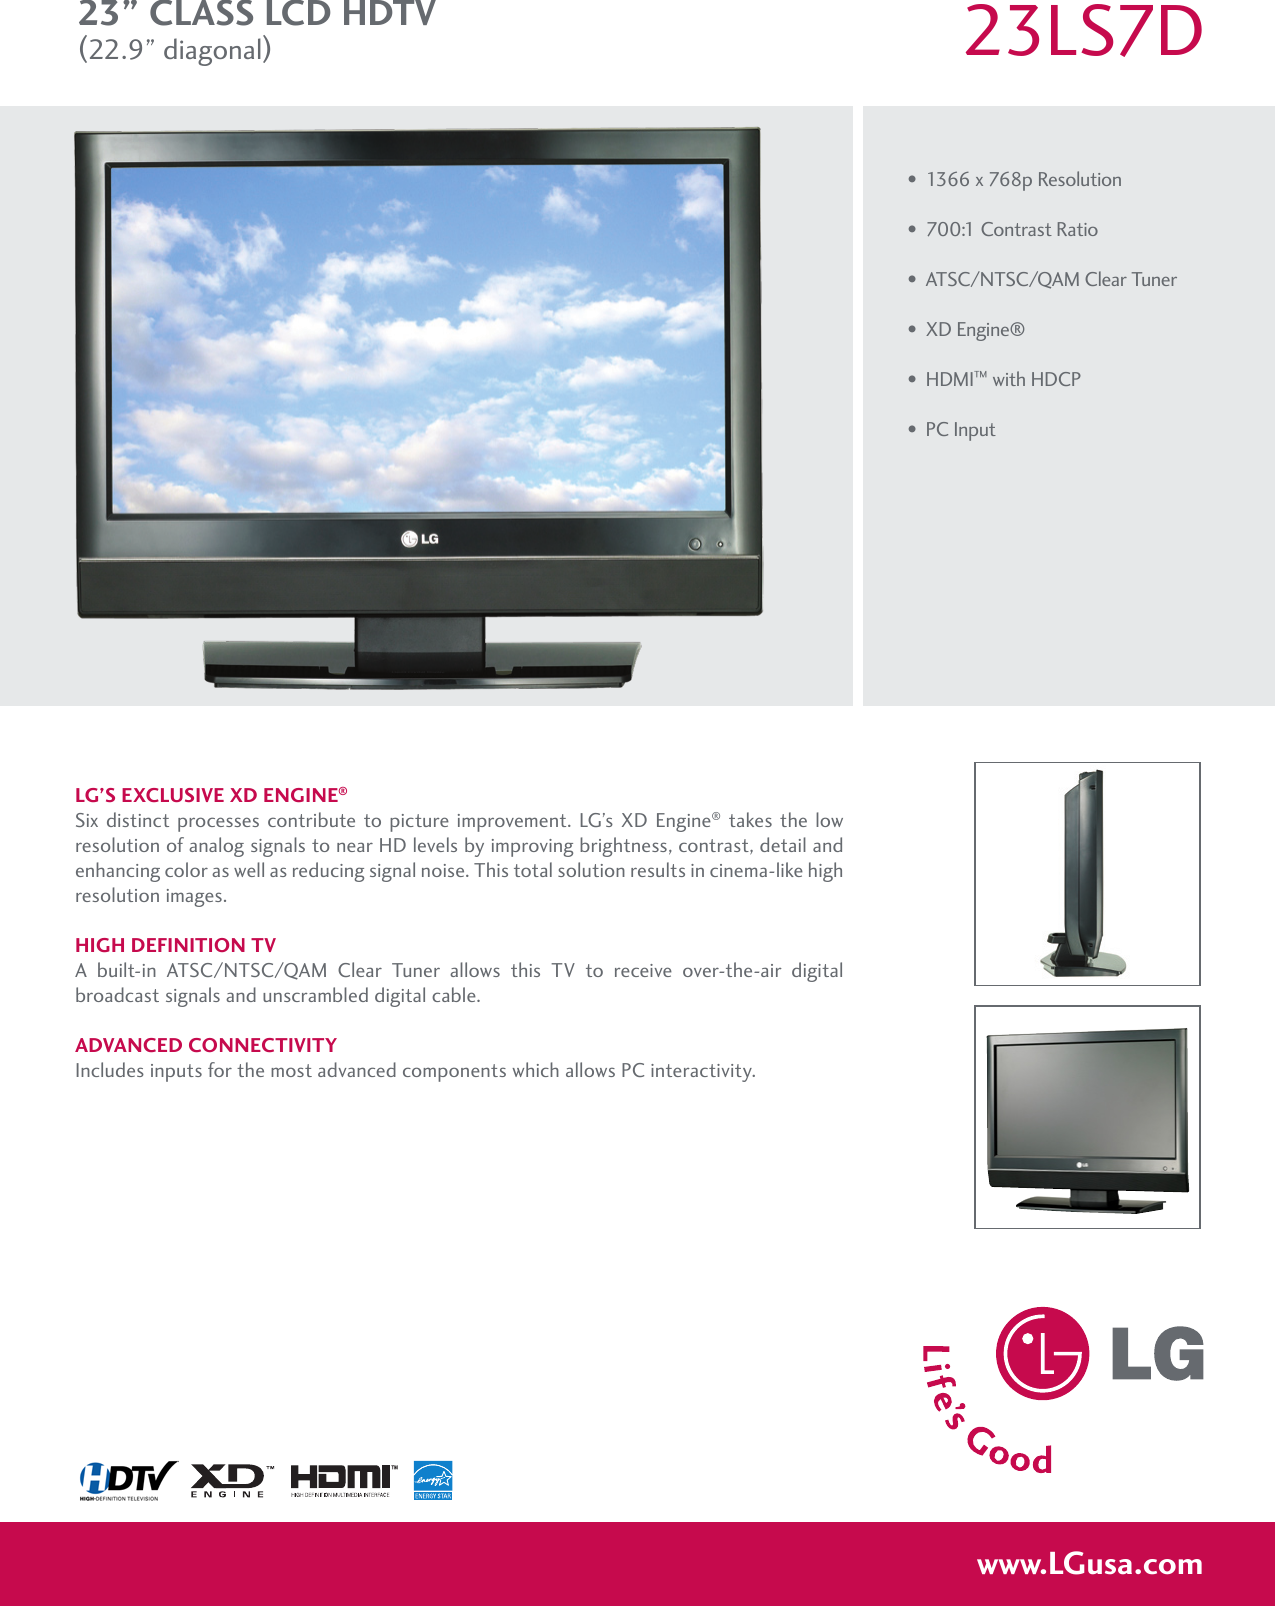 Page 1 of 2 - LG 23LS7D User Manual Specification Spec Sheet